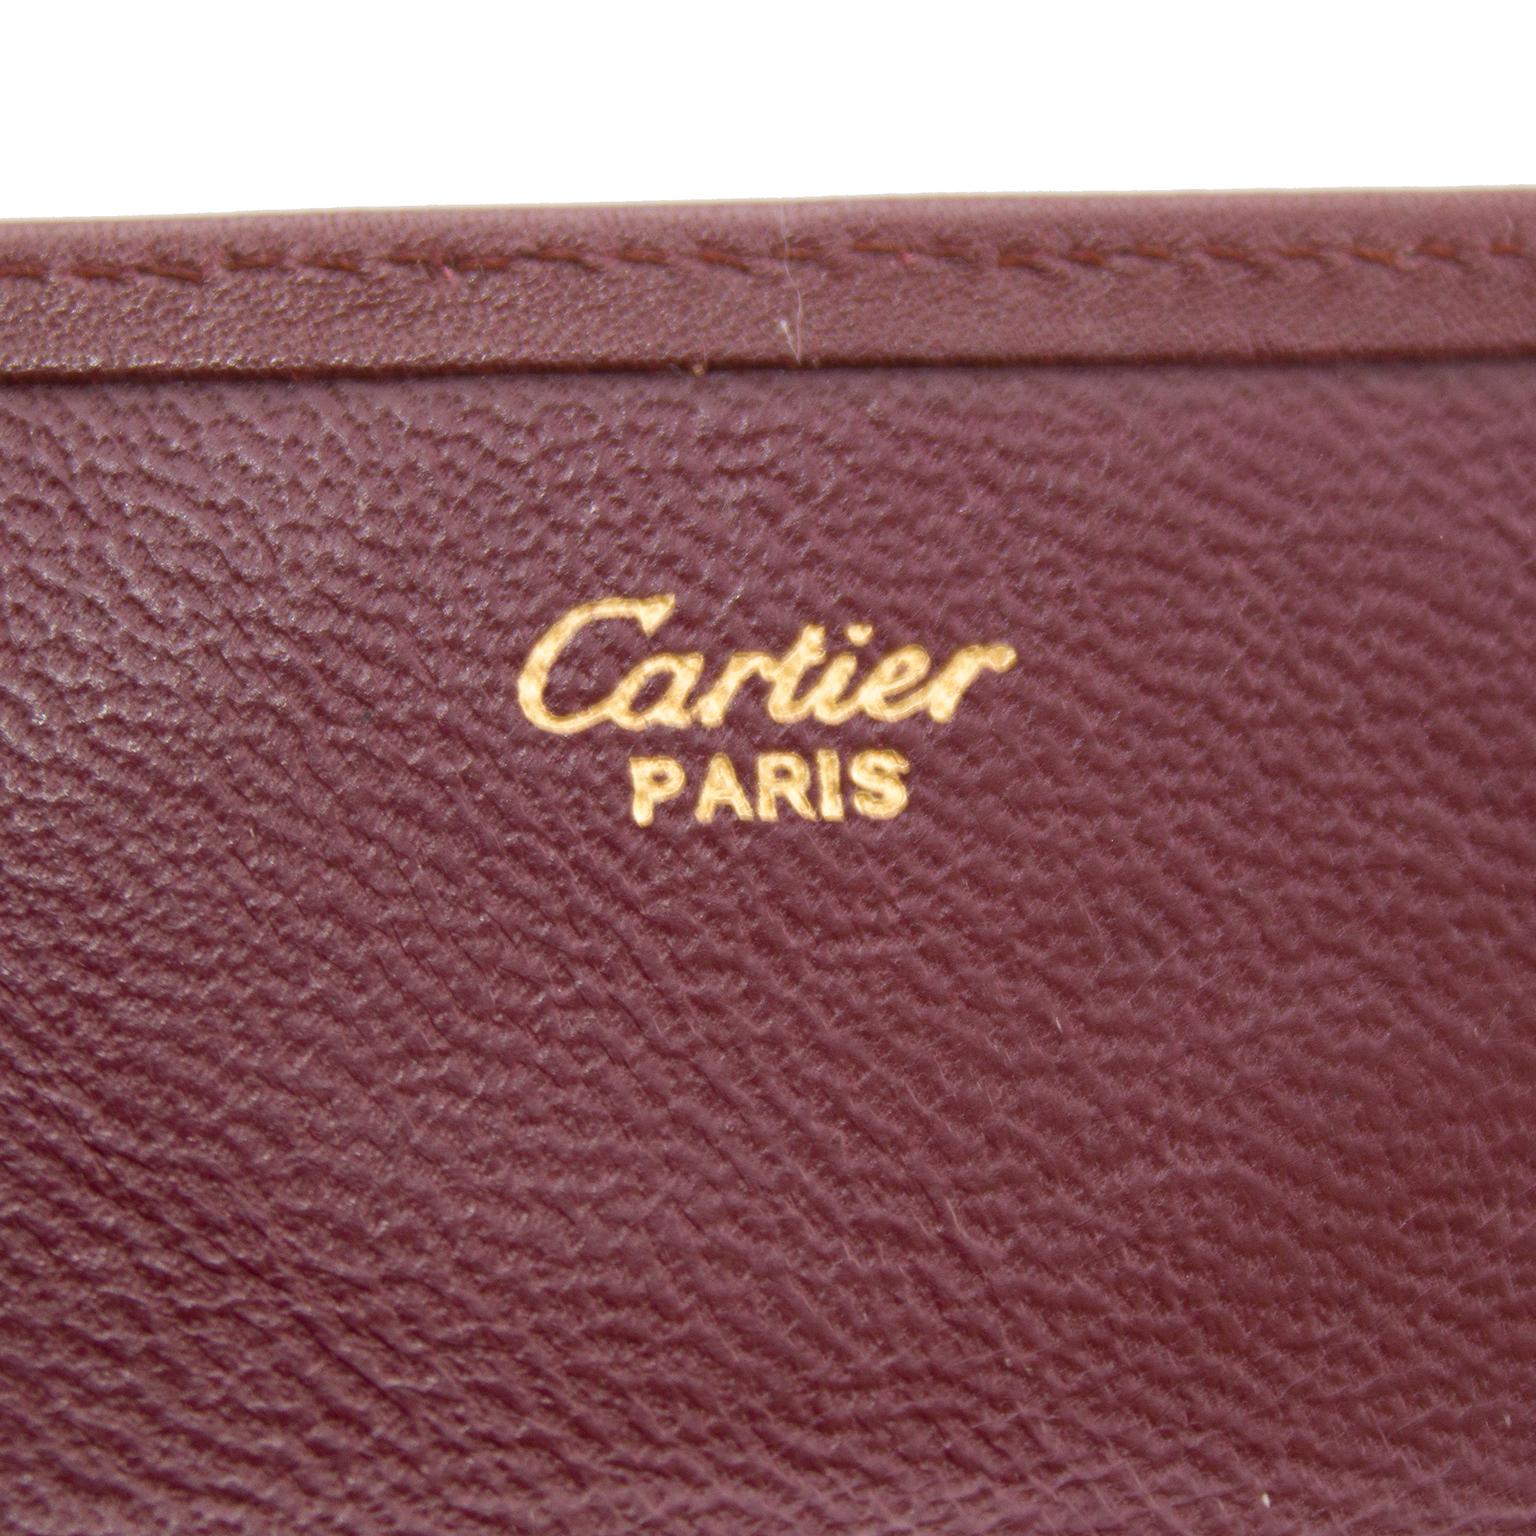 Women's or Men's 1980s Cartier Burgundy Leather Billfold Wallet With Fold-Over Closure